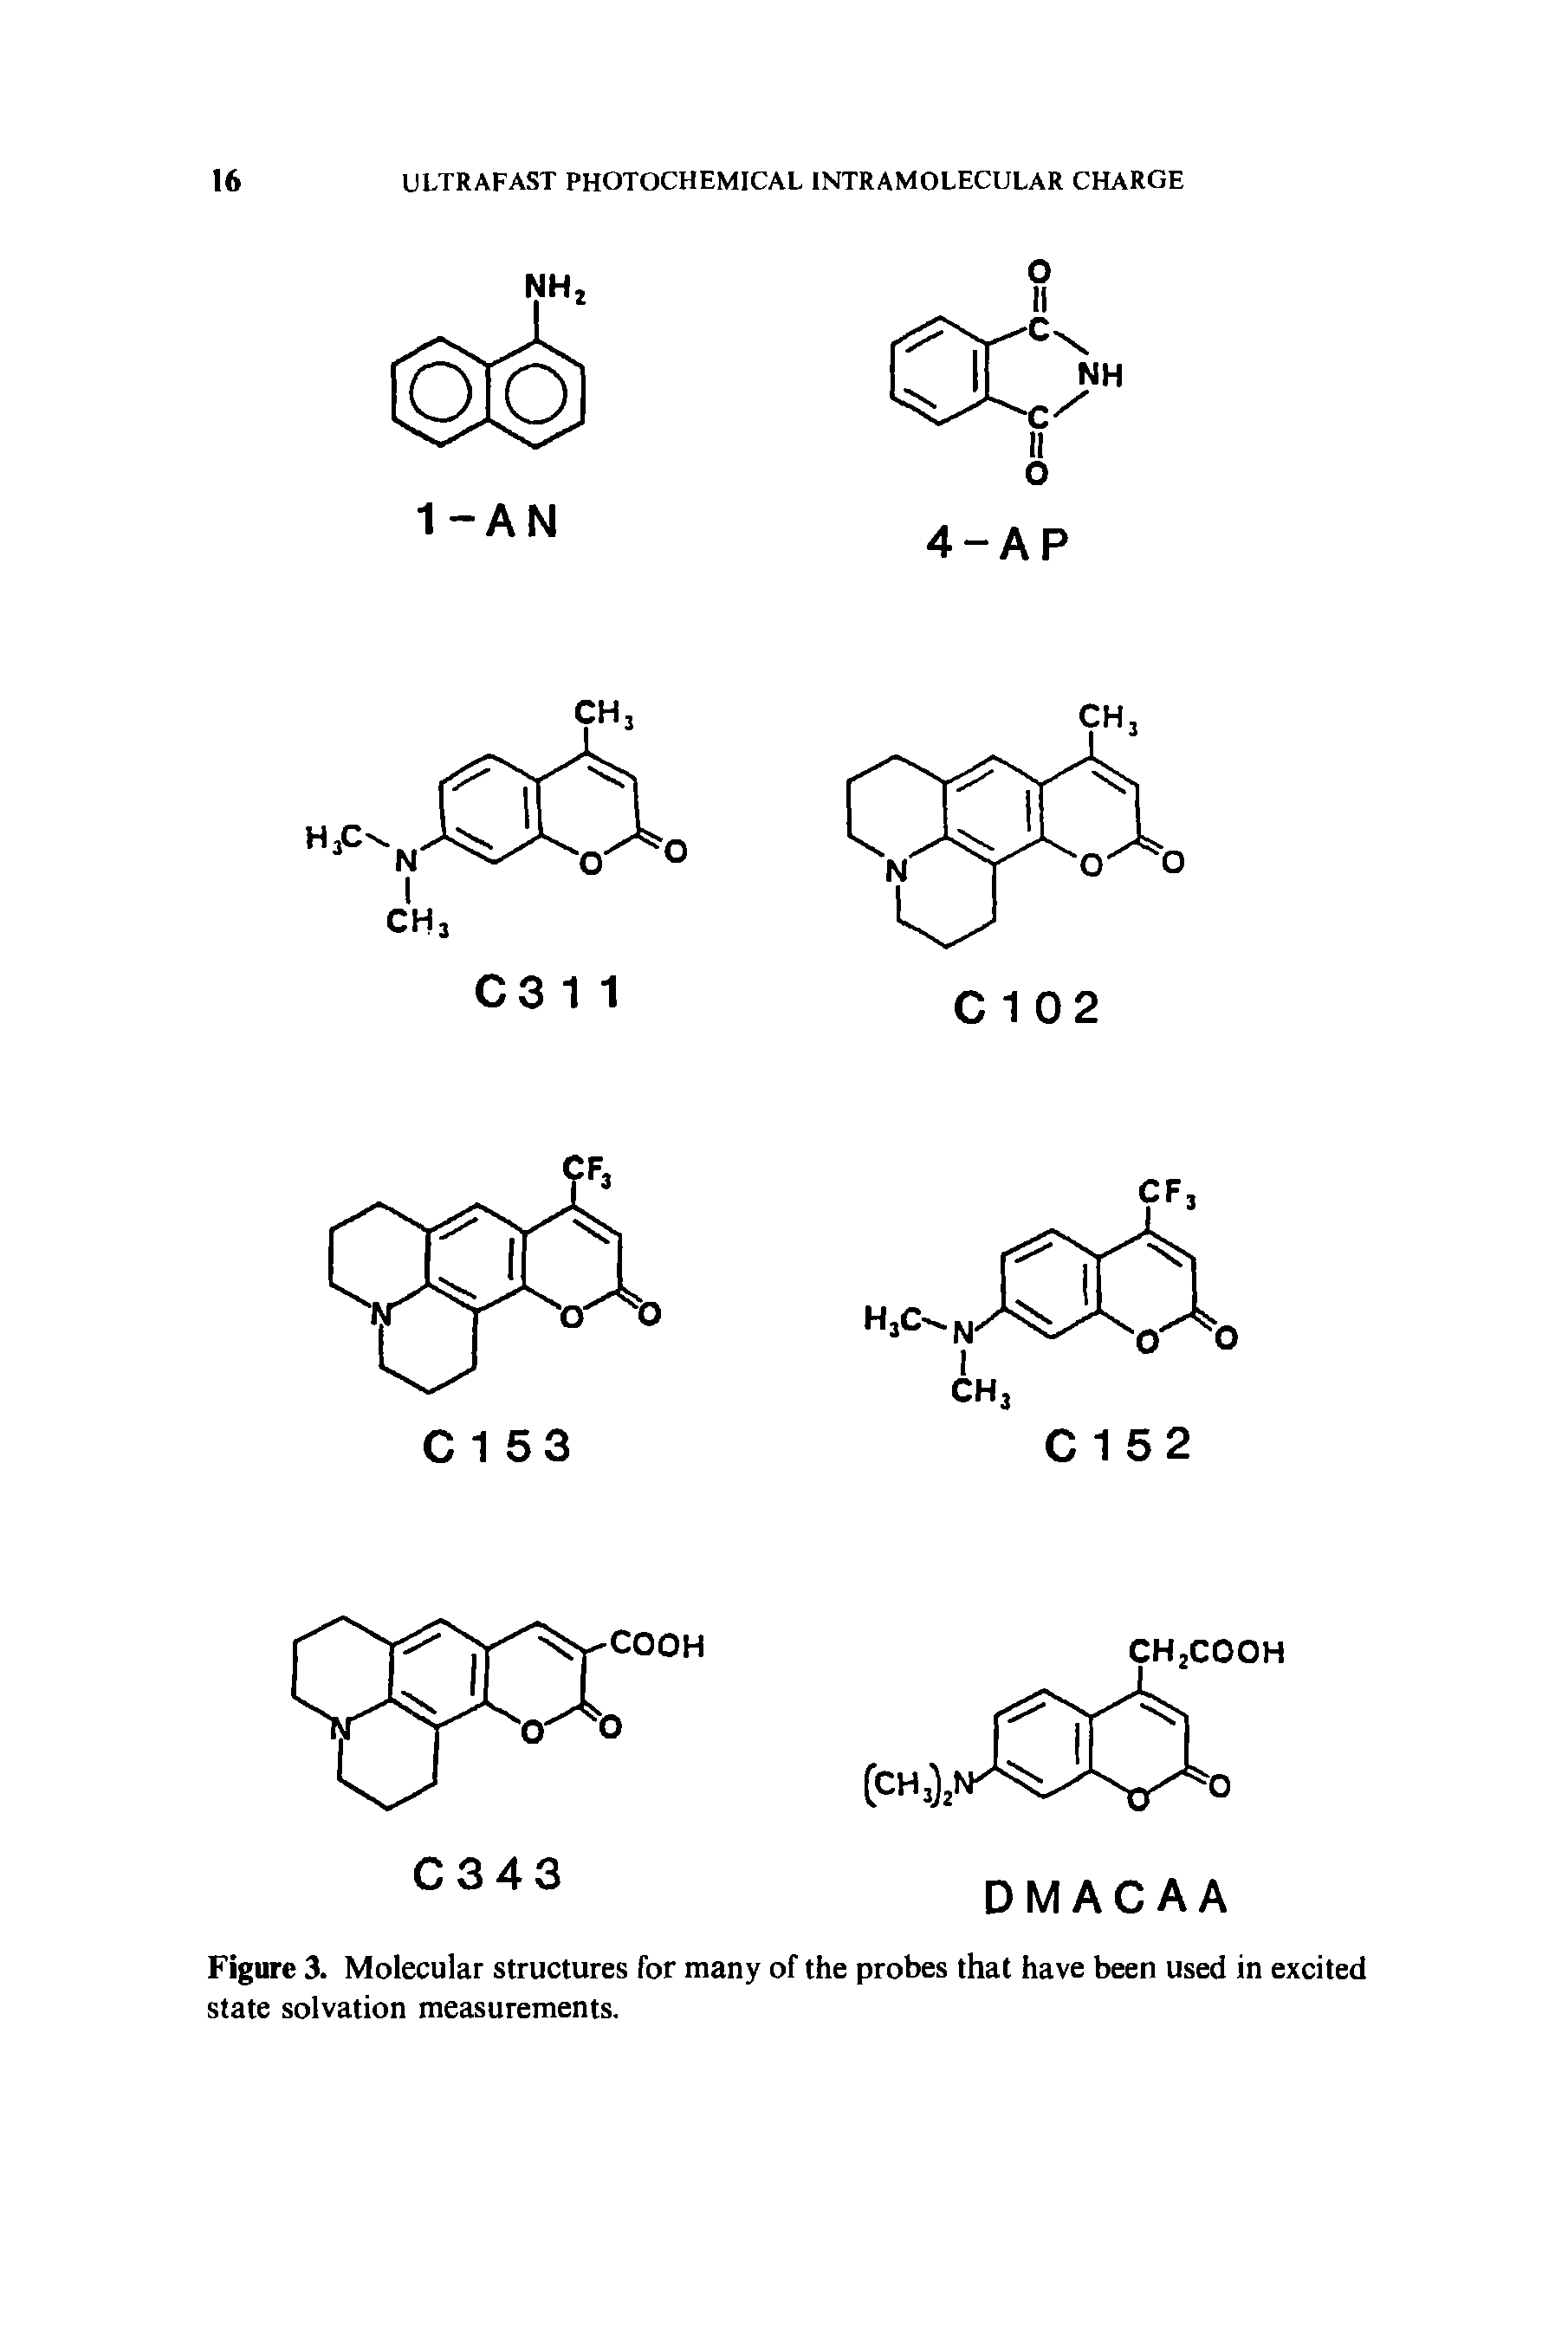 Figure 3. Molecular structures for many of the probes that have been used in excited state solvation measurements.